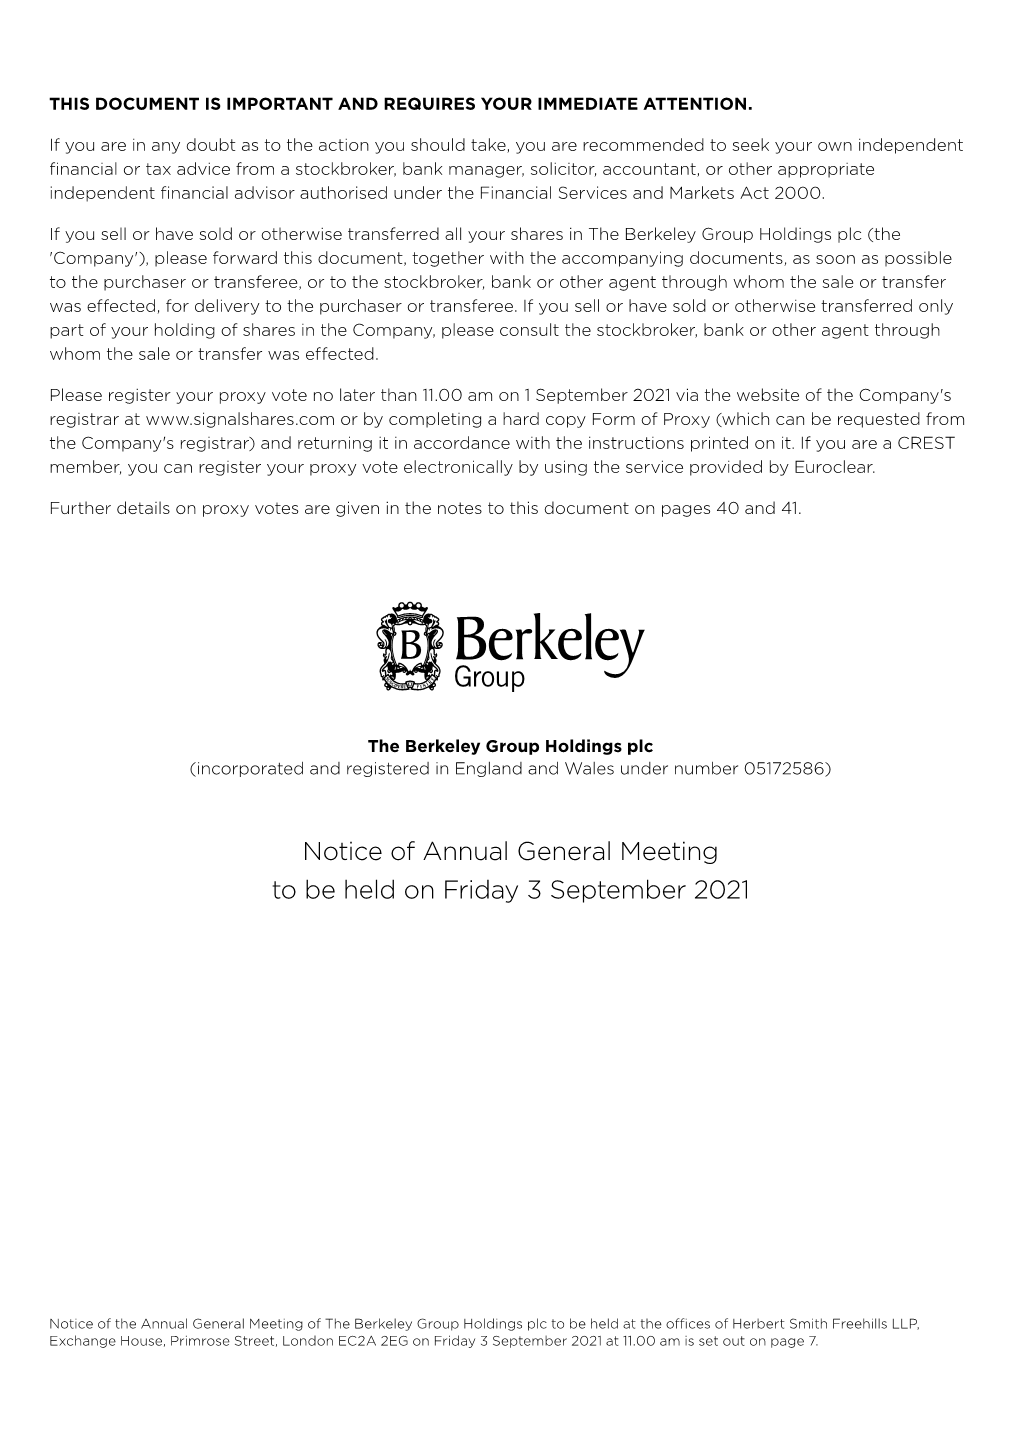 Notice of Annual General Meeting to Be Held on Friday 3 September 2021